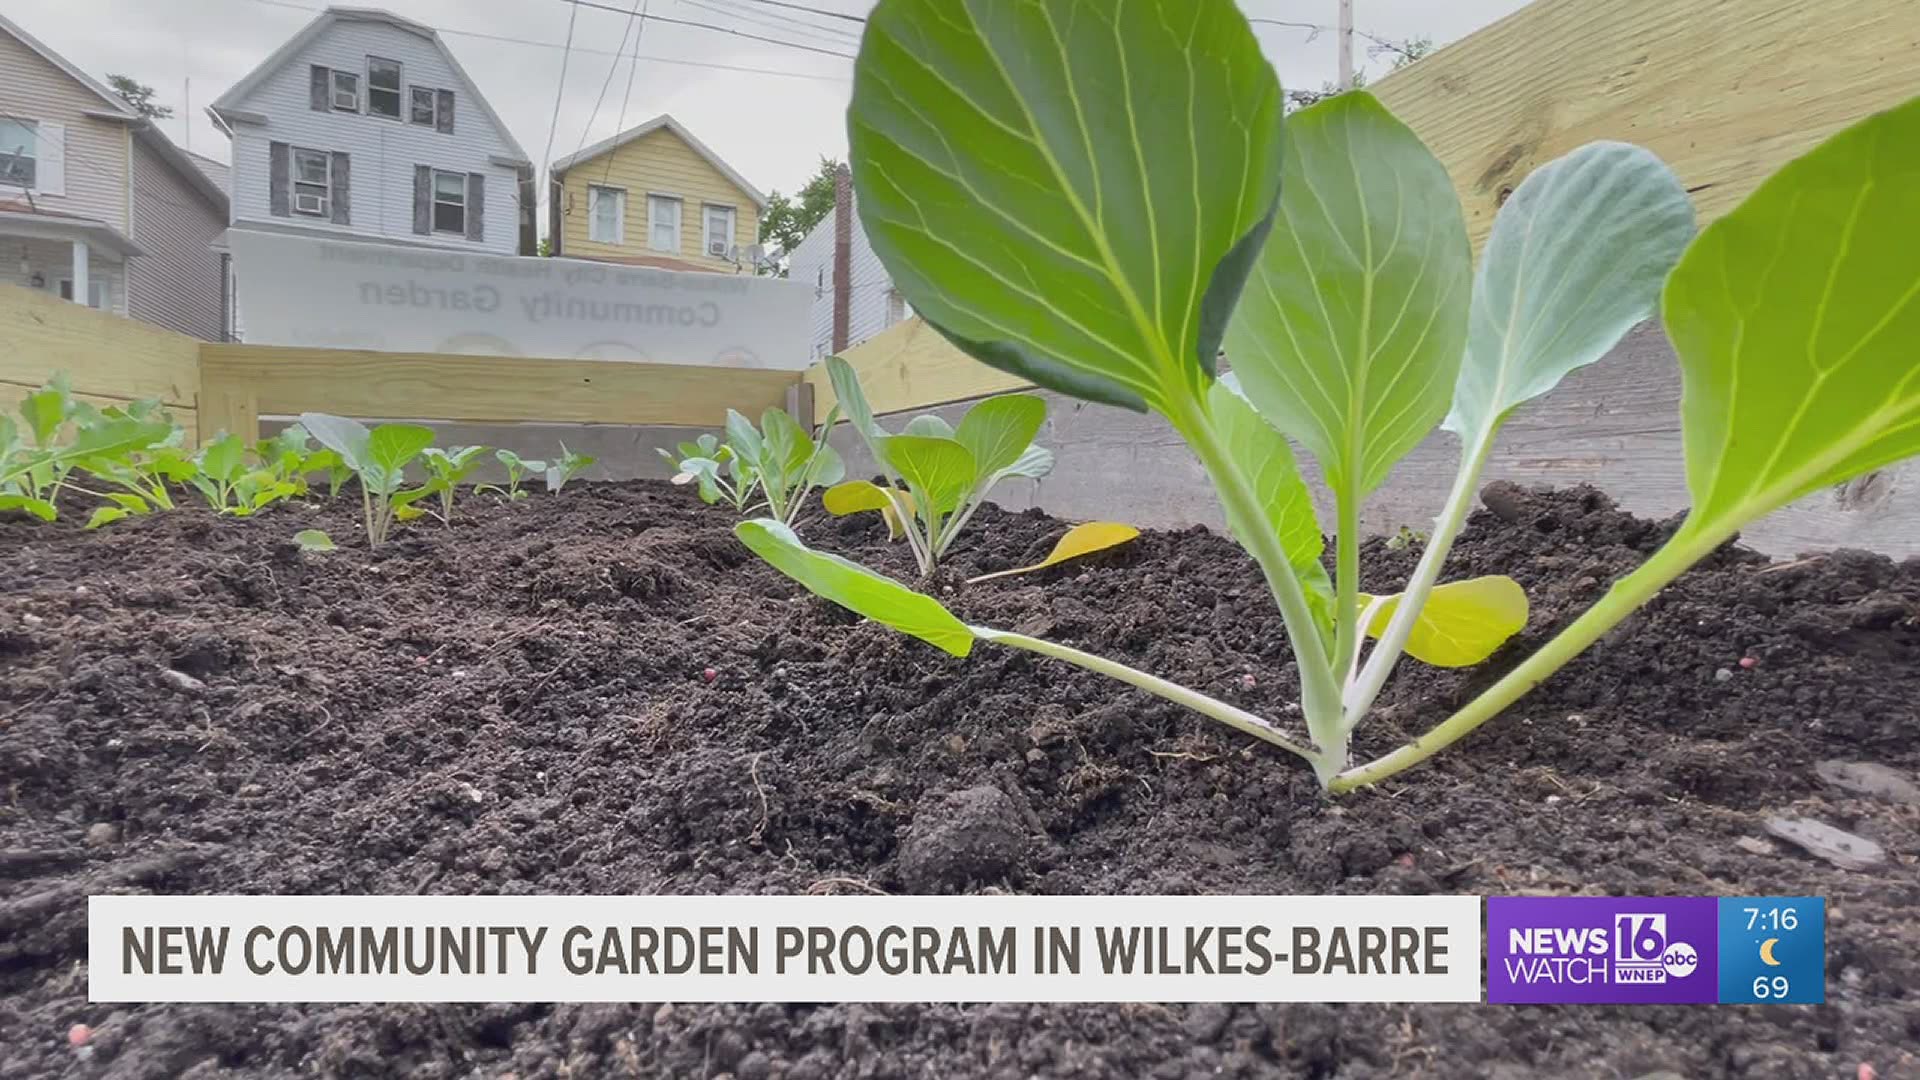 New community gardens are being set up in the city with help from the Wilkes-Barre Health Department to supply food pantries and other agencies with fresh produce.